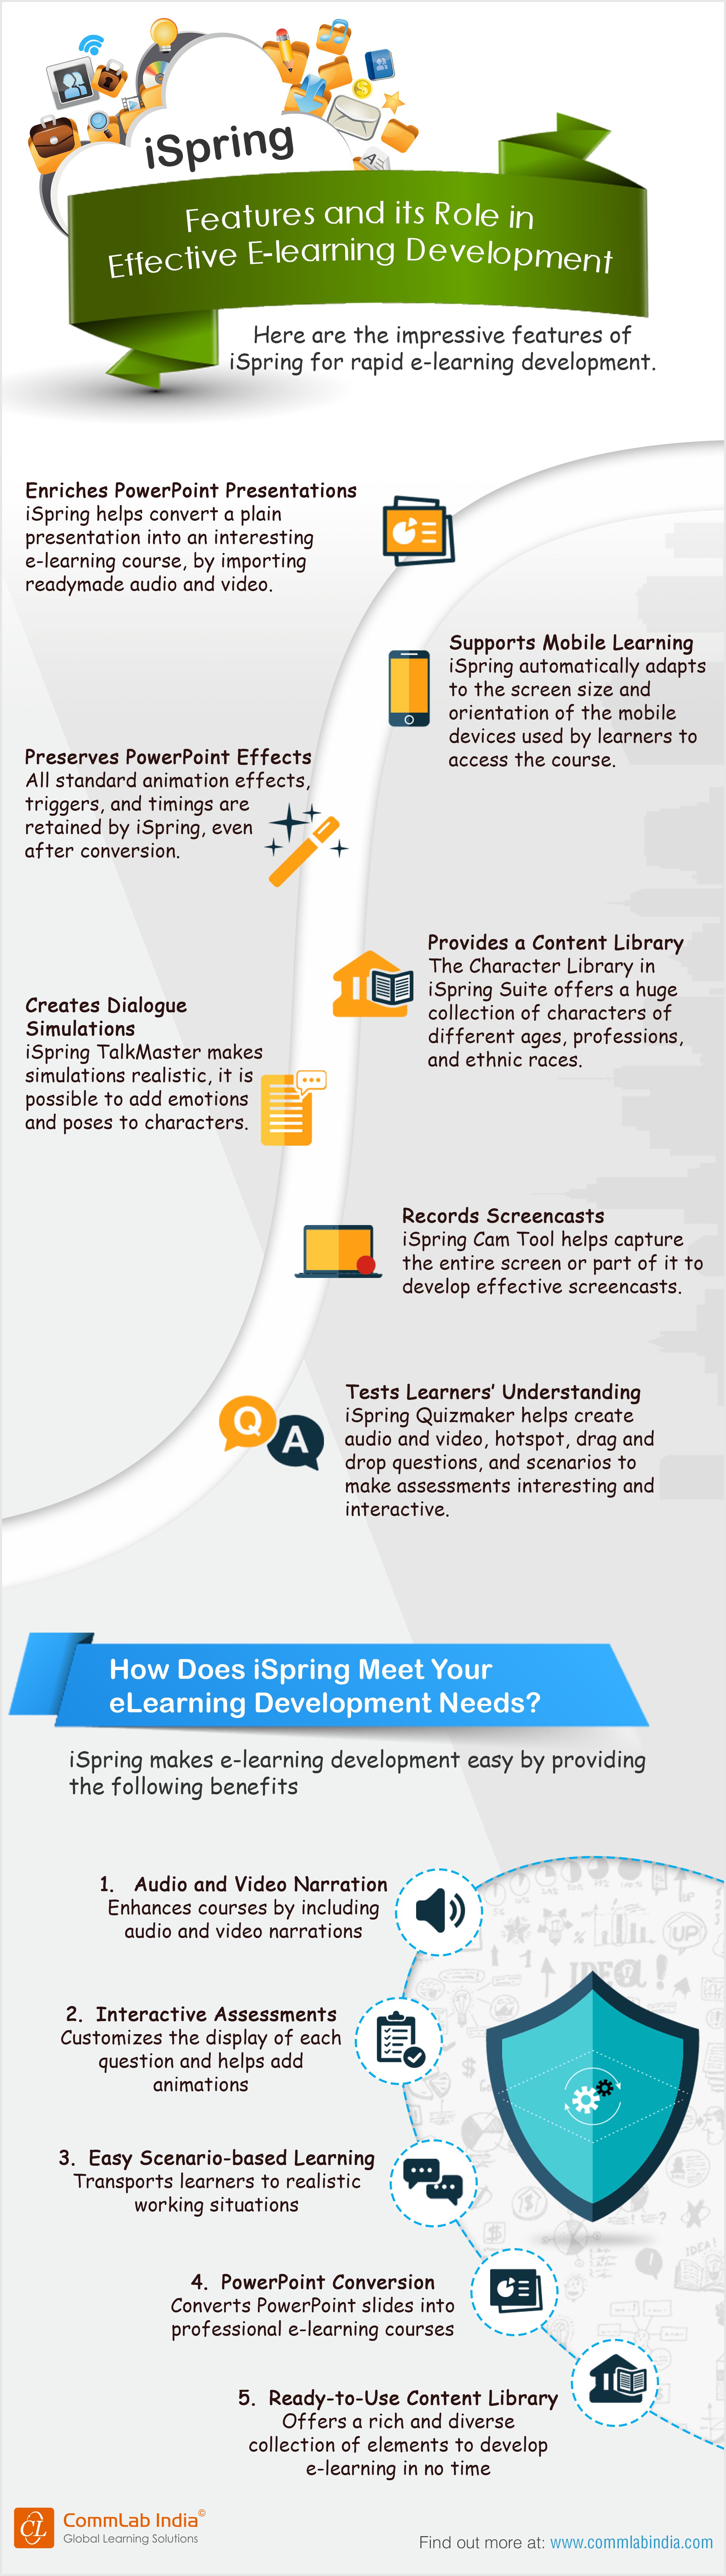 iSpring Features and its Role in Effective E-learning Development[Infographic]